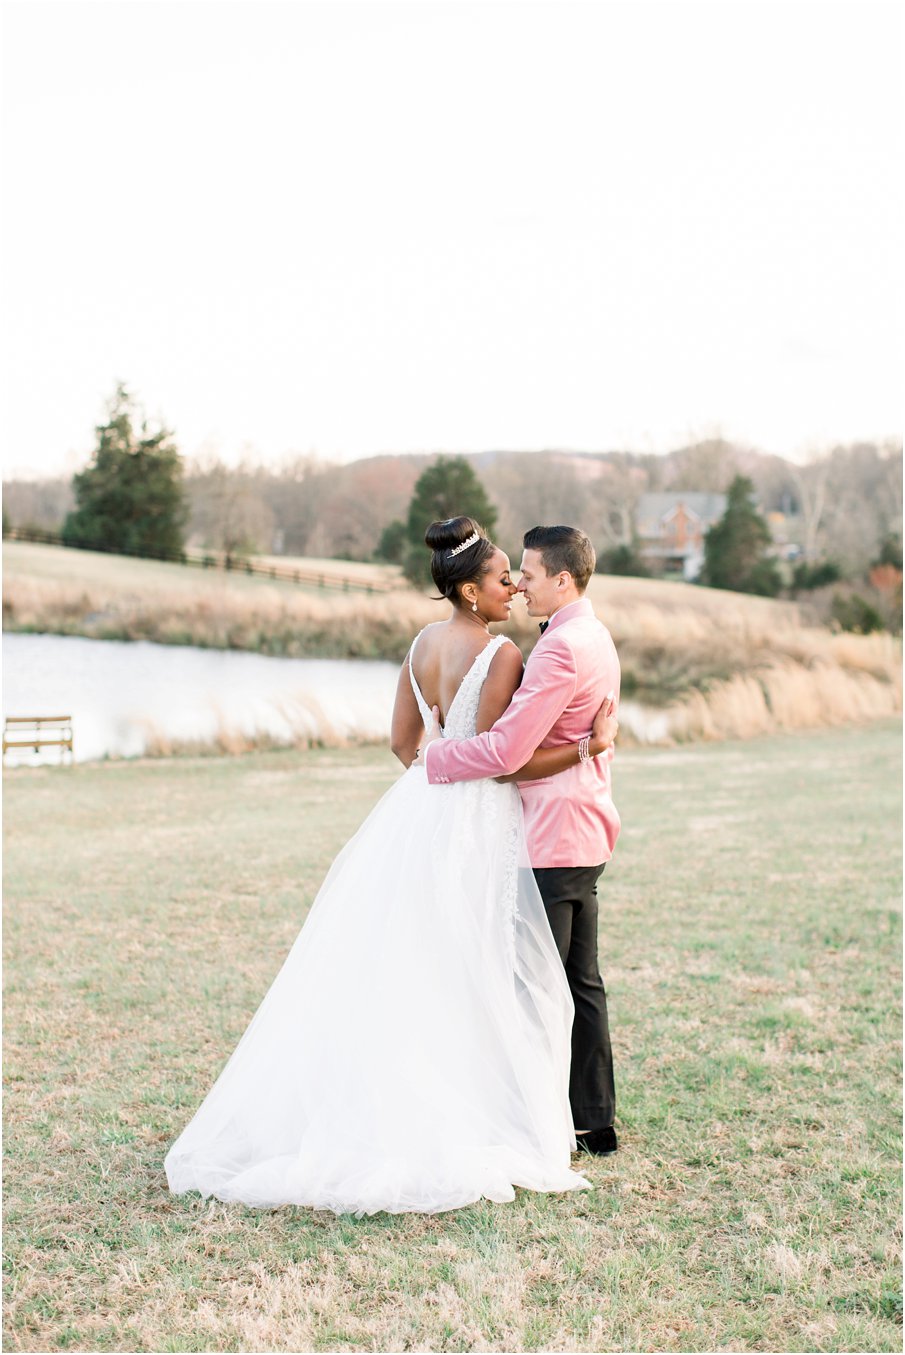 A Bride and Groom Portrait taken at sunset after their Walden Hall wedding. Their blush themed wedding day was filled with all things blush, even the groom wore a blush, velvet suit jacket!